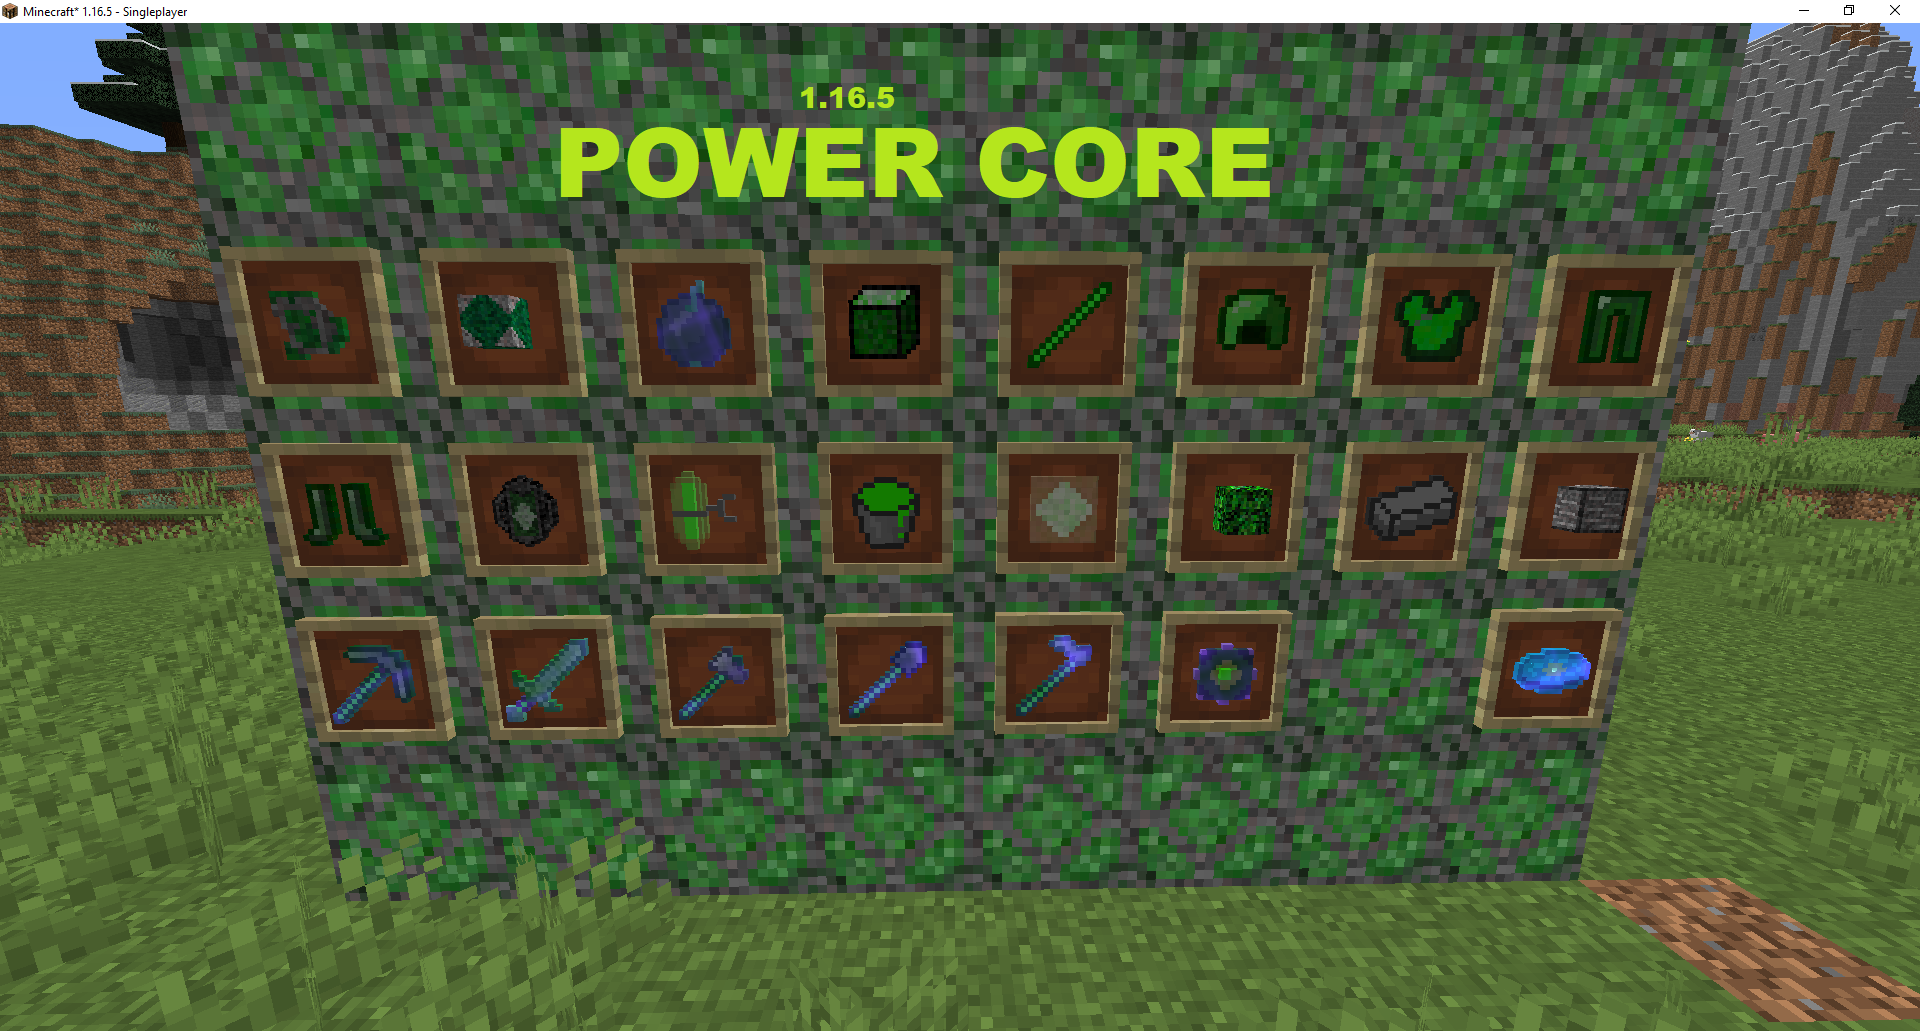 The items of the power core